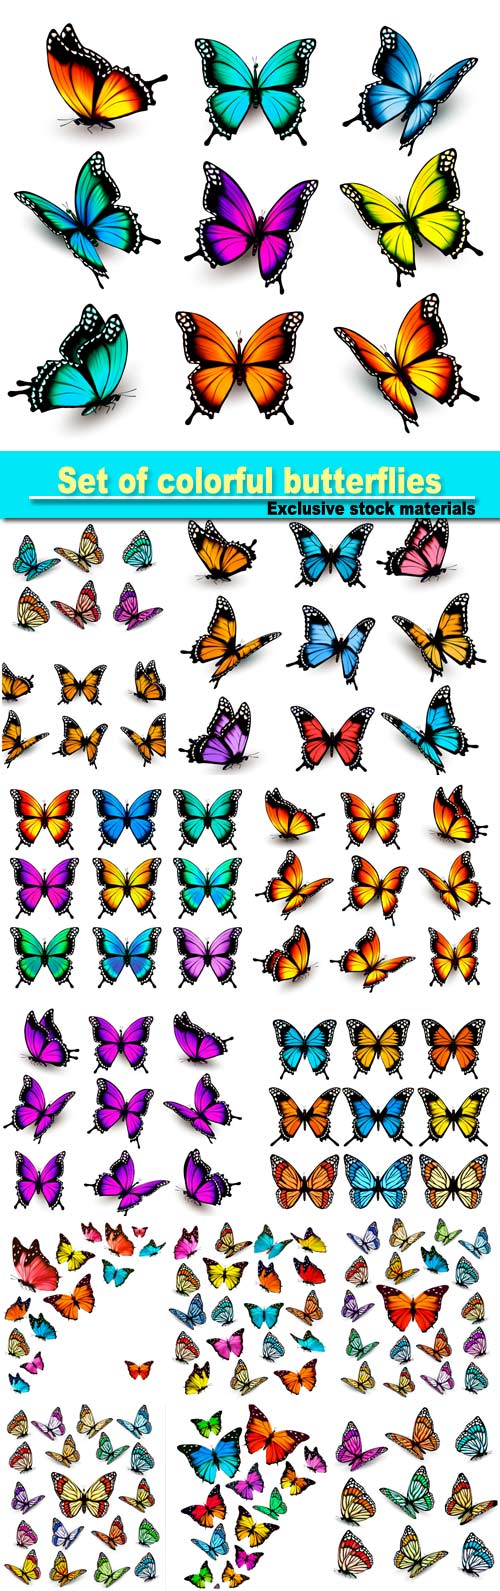 Set of colorful butterflies vector #7